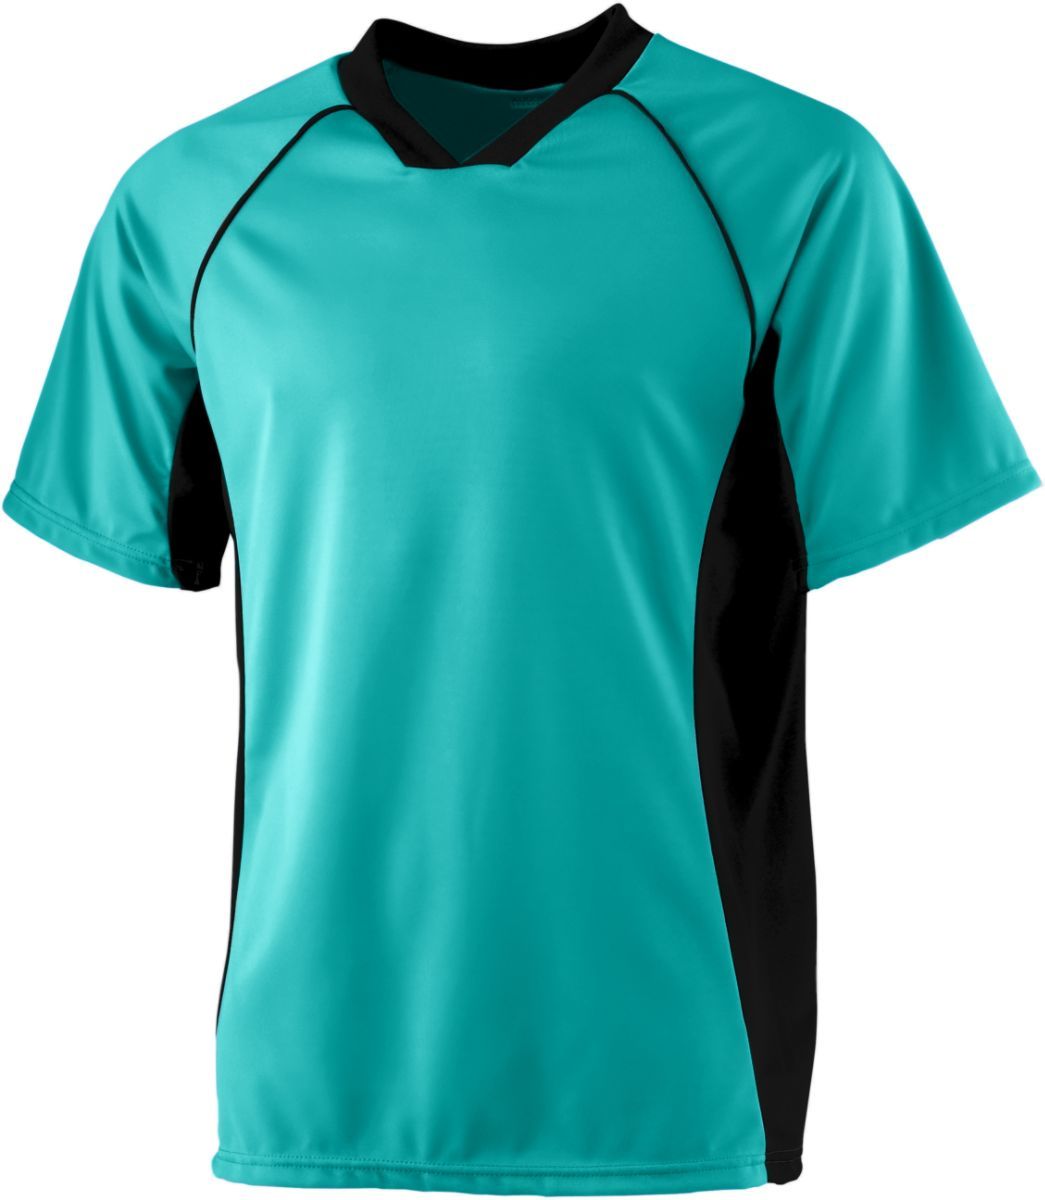 Augusta Sportswear Youth Wicking Soccer Jersey in Teal/Black  -Part of the Youth, Youth-Jersey, Augusta-Products, Soccer, Shirts, All-Sports-1 product lines at KanaleyCreations.com